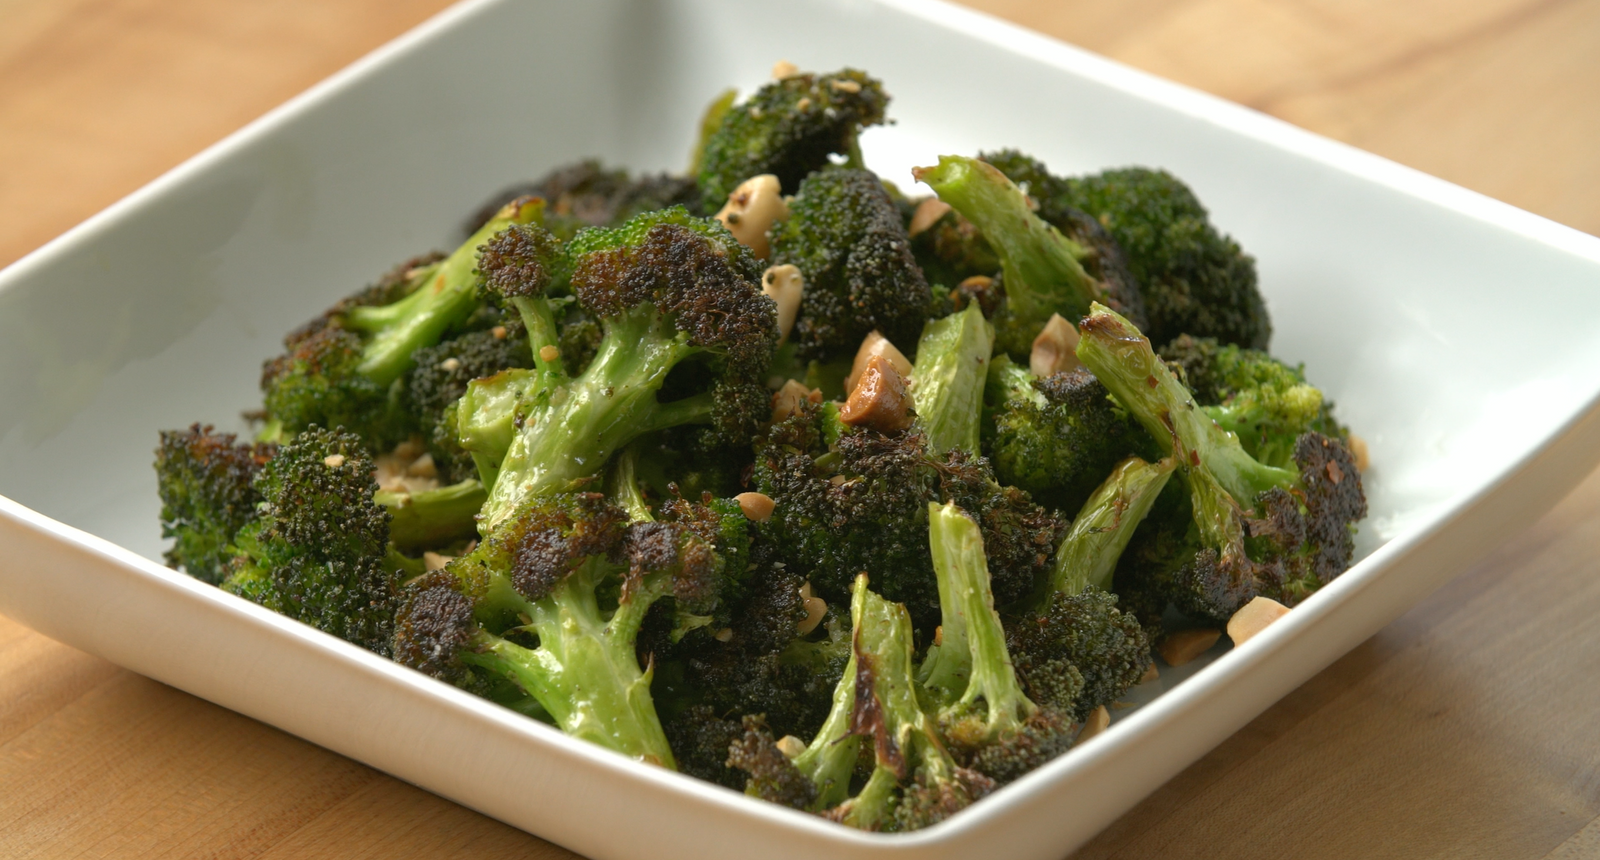 How to Make Roasted Broccoli with Chopped Nuts